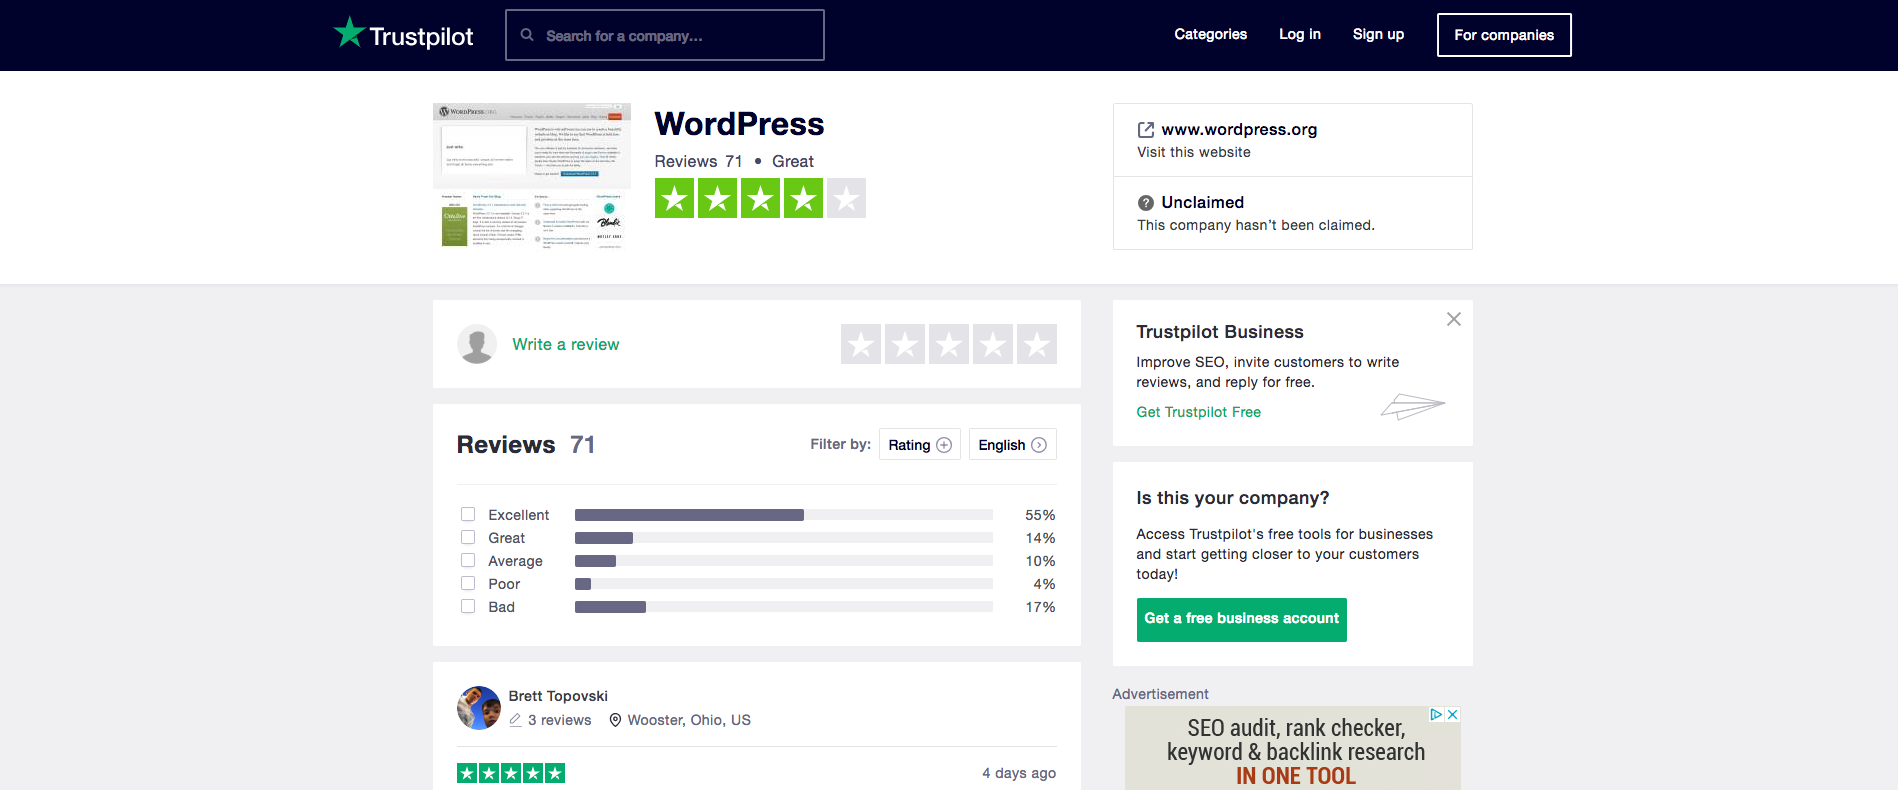 Screenshot of software review site TrustPilot interface showcasing the WordPress reviews on their site.